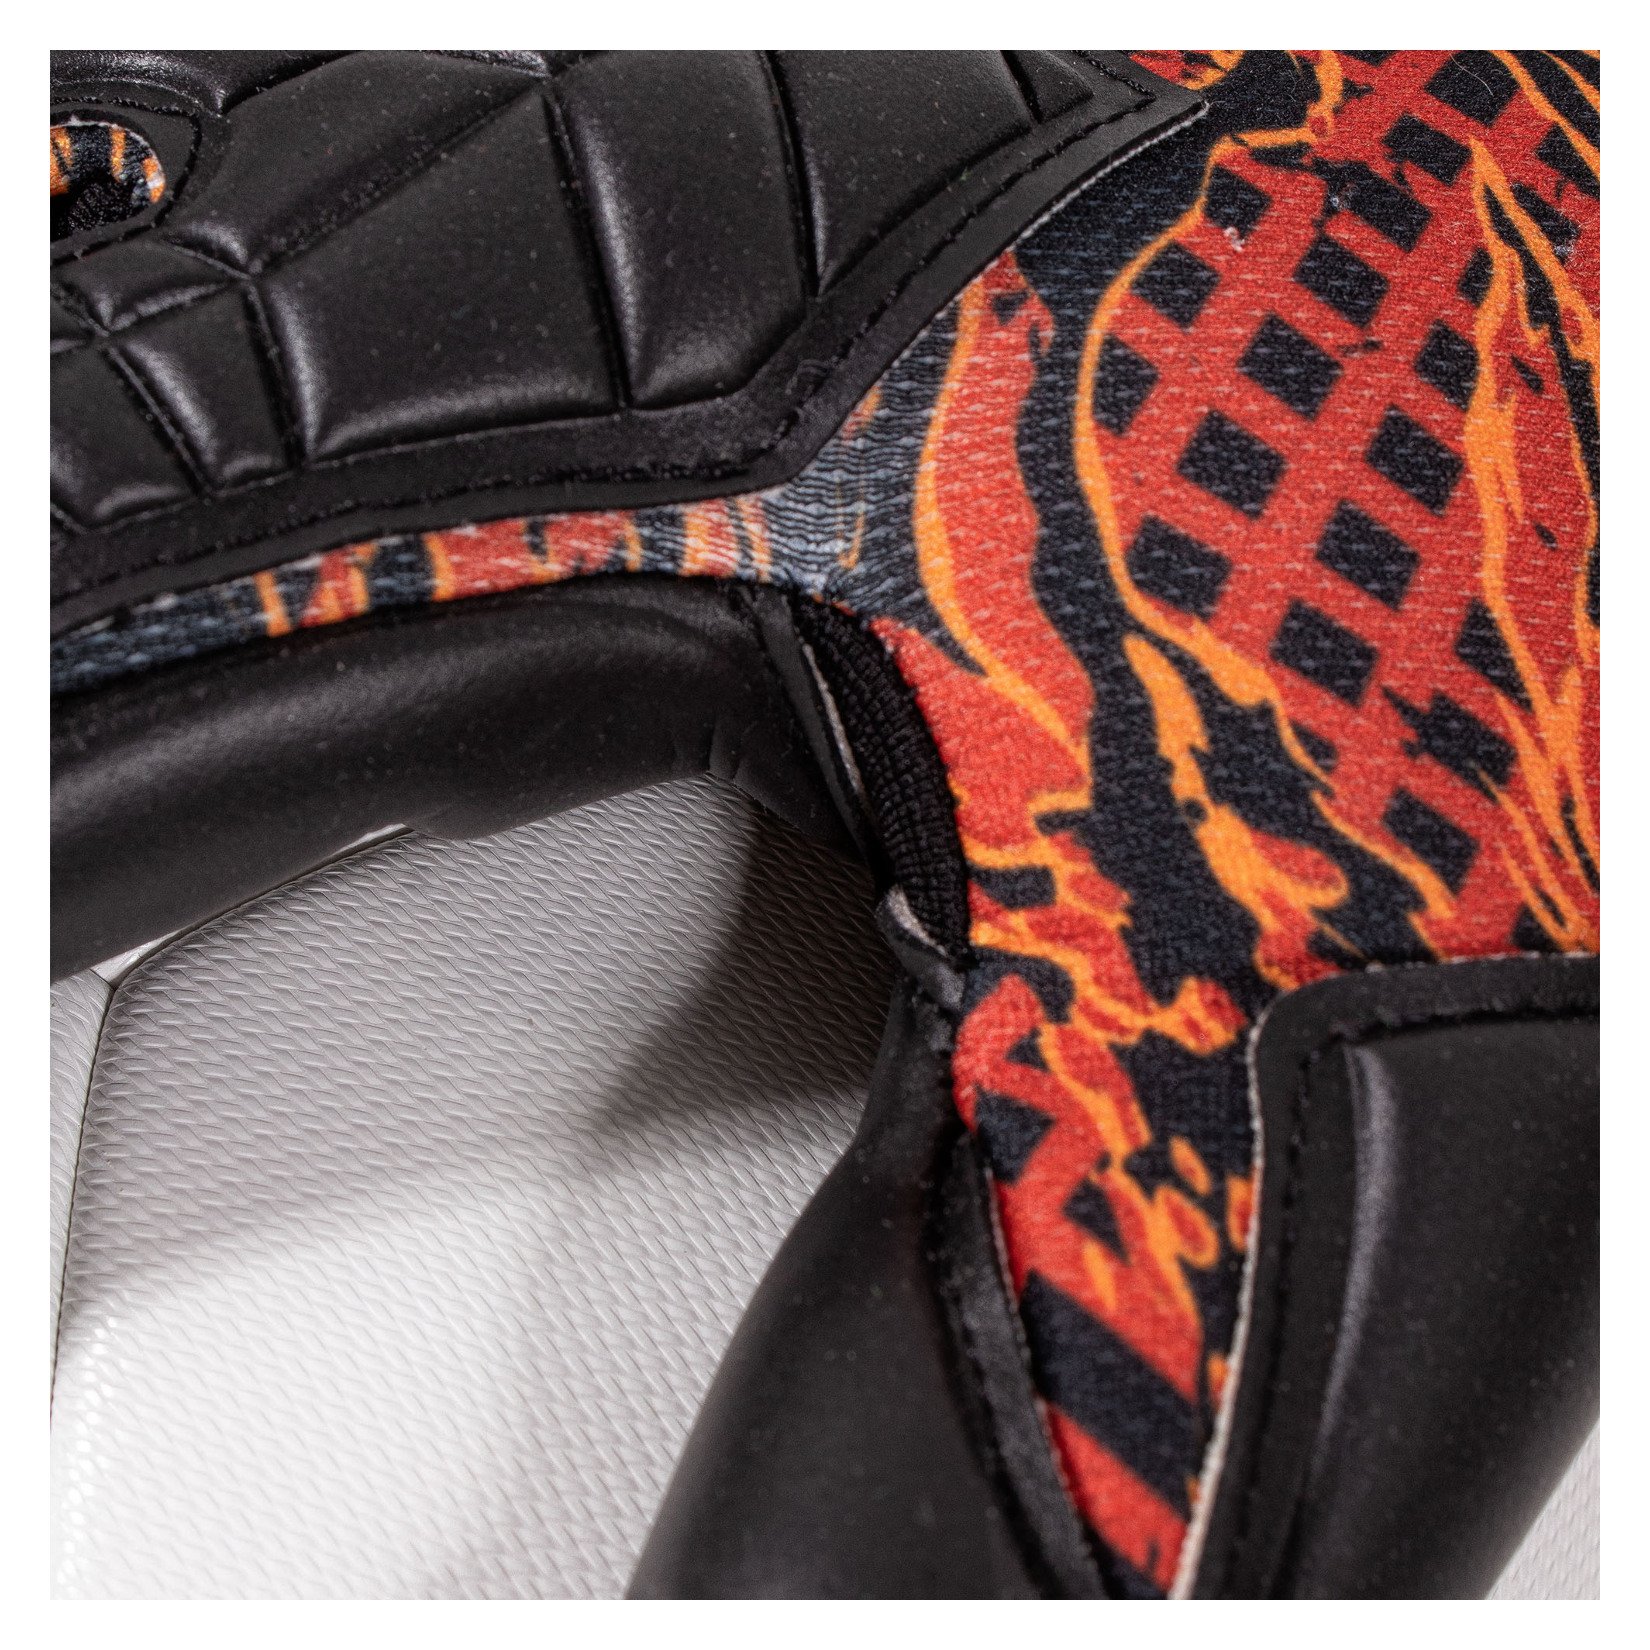 Stanno Claw Goalkeepers Glove